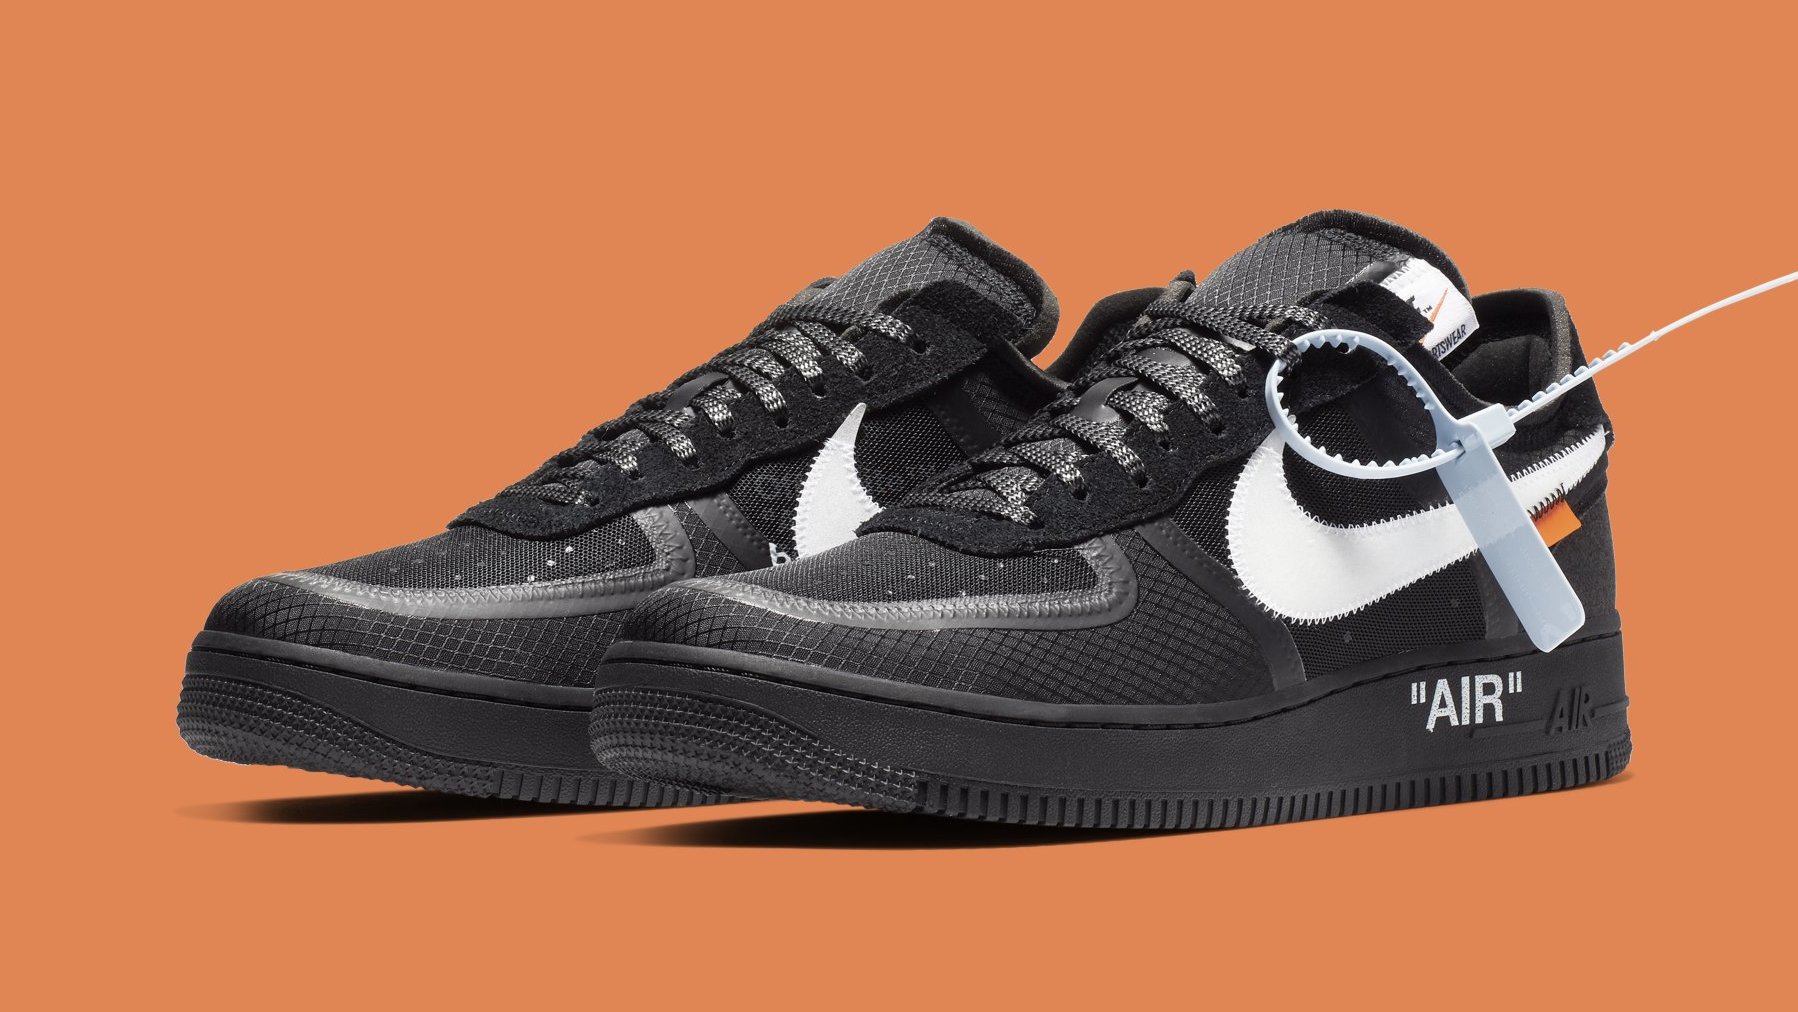 off white air force 1 black low